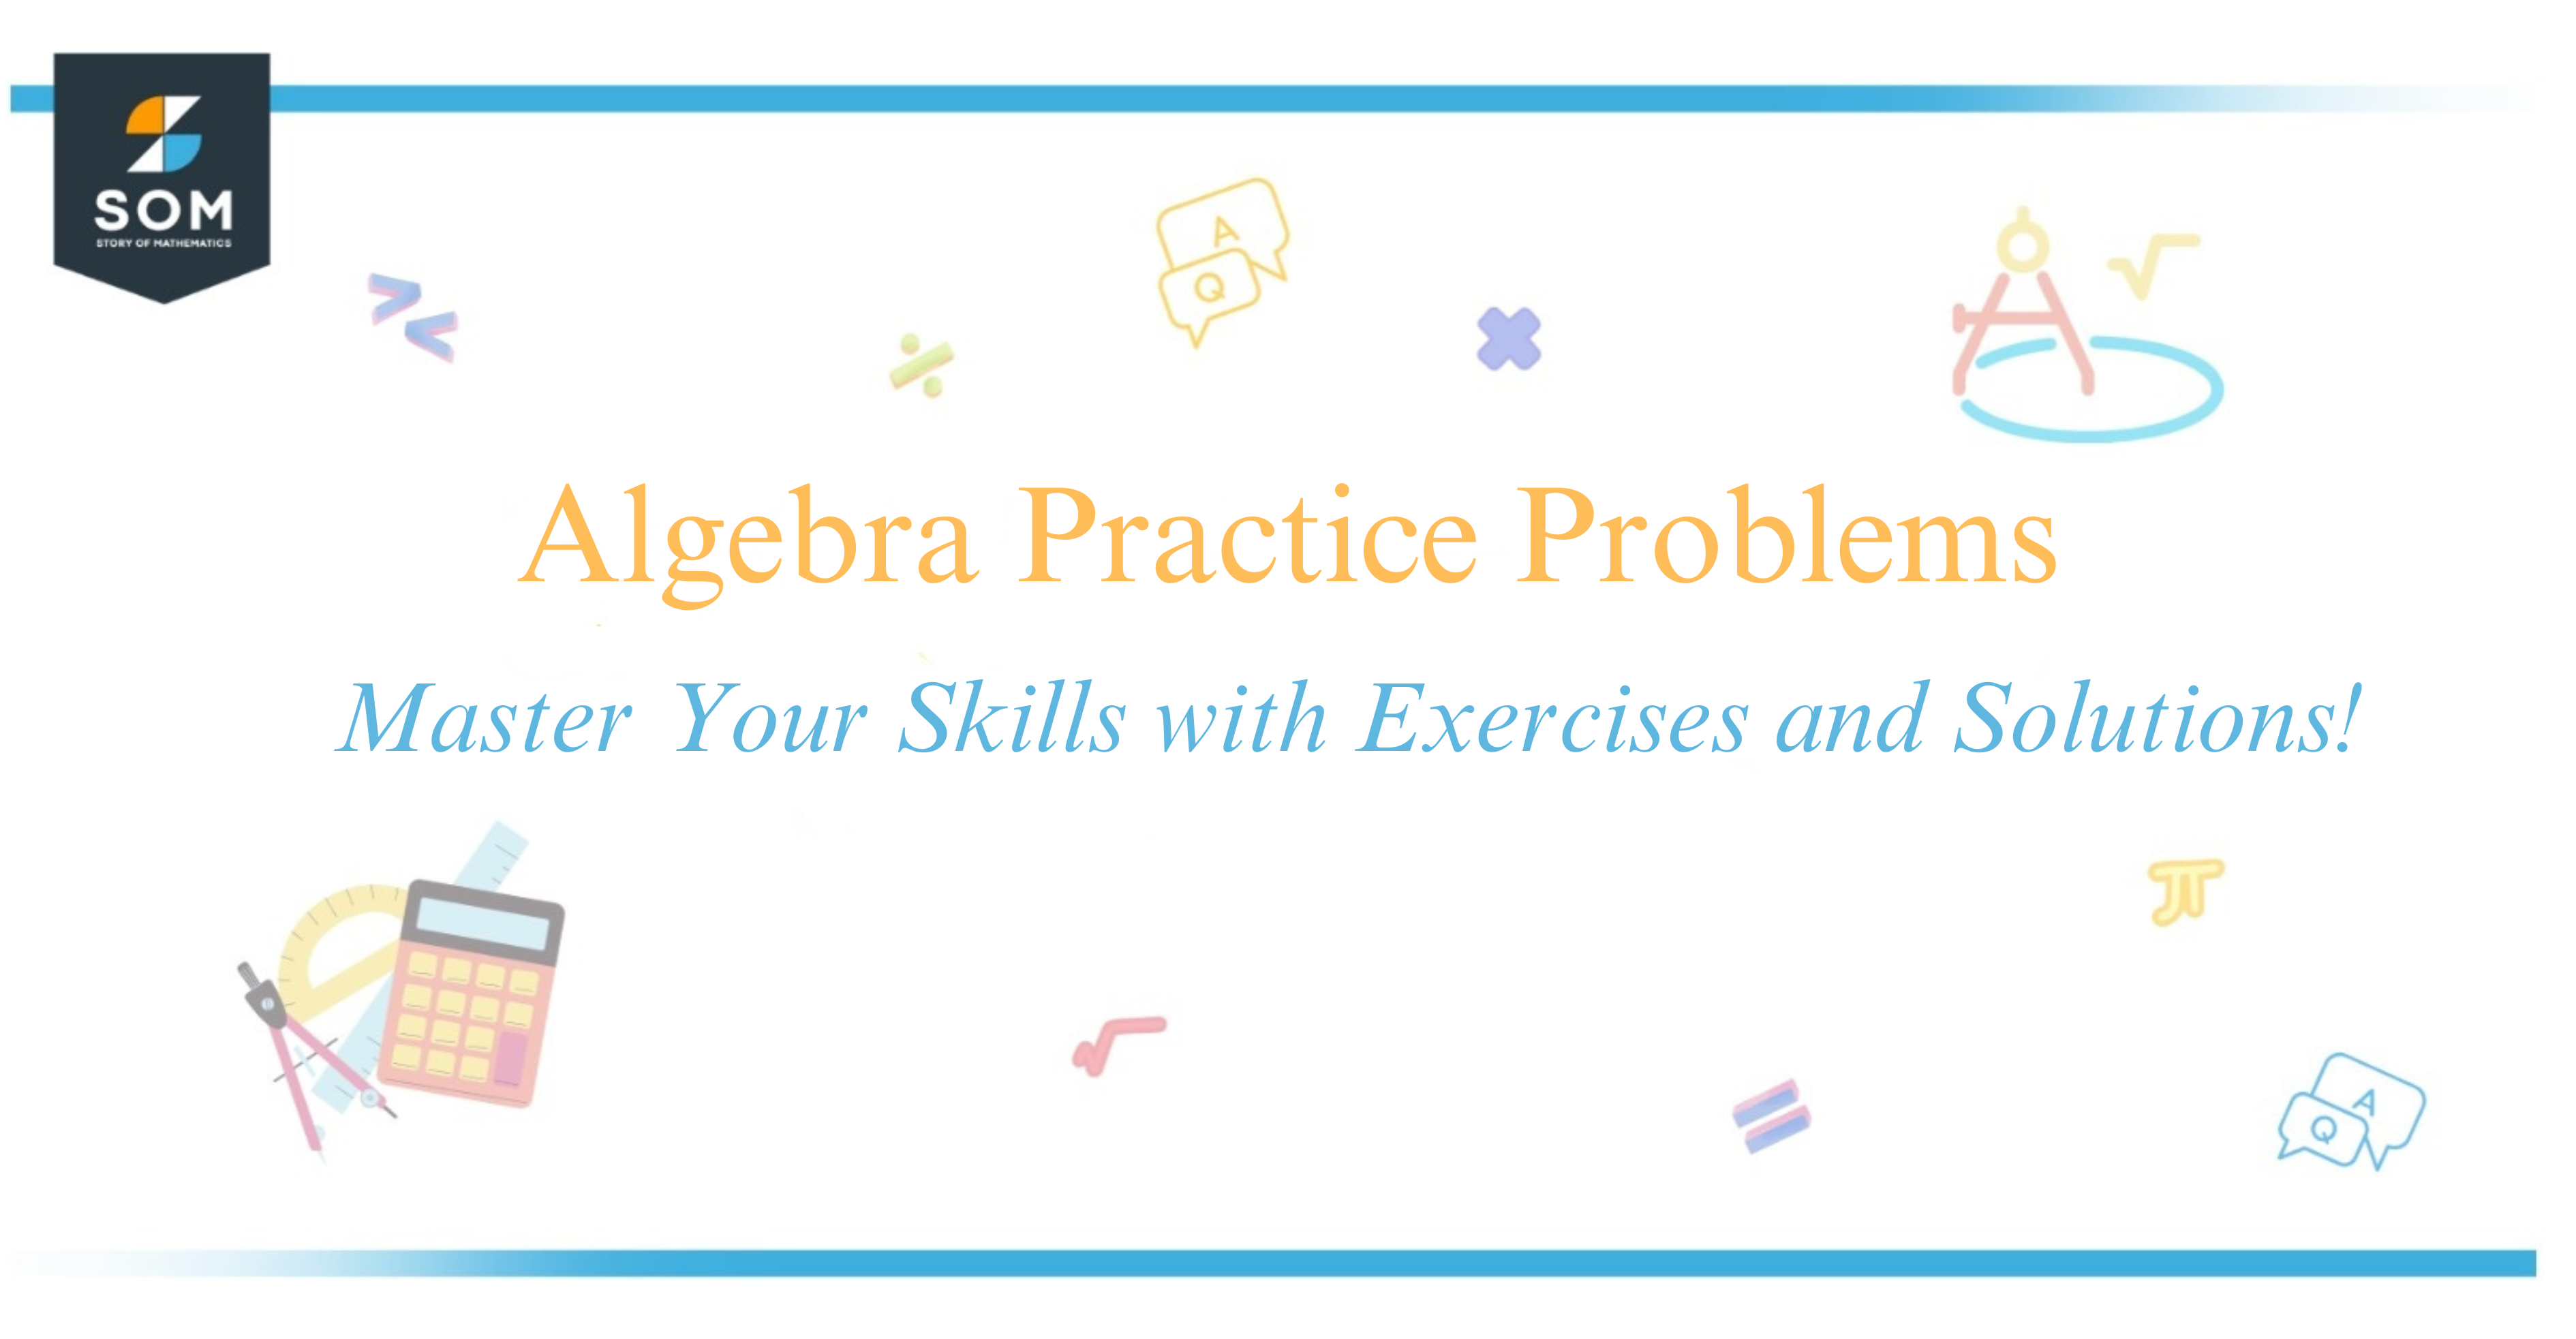 Algebra Practice Problems Master Your Skills with Exercises and Solutions!